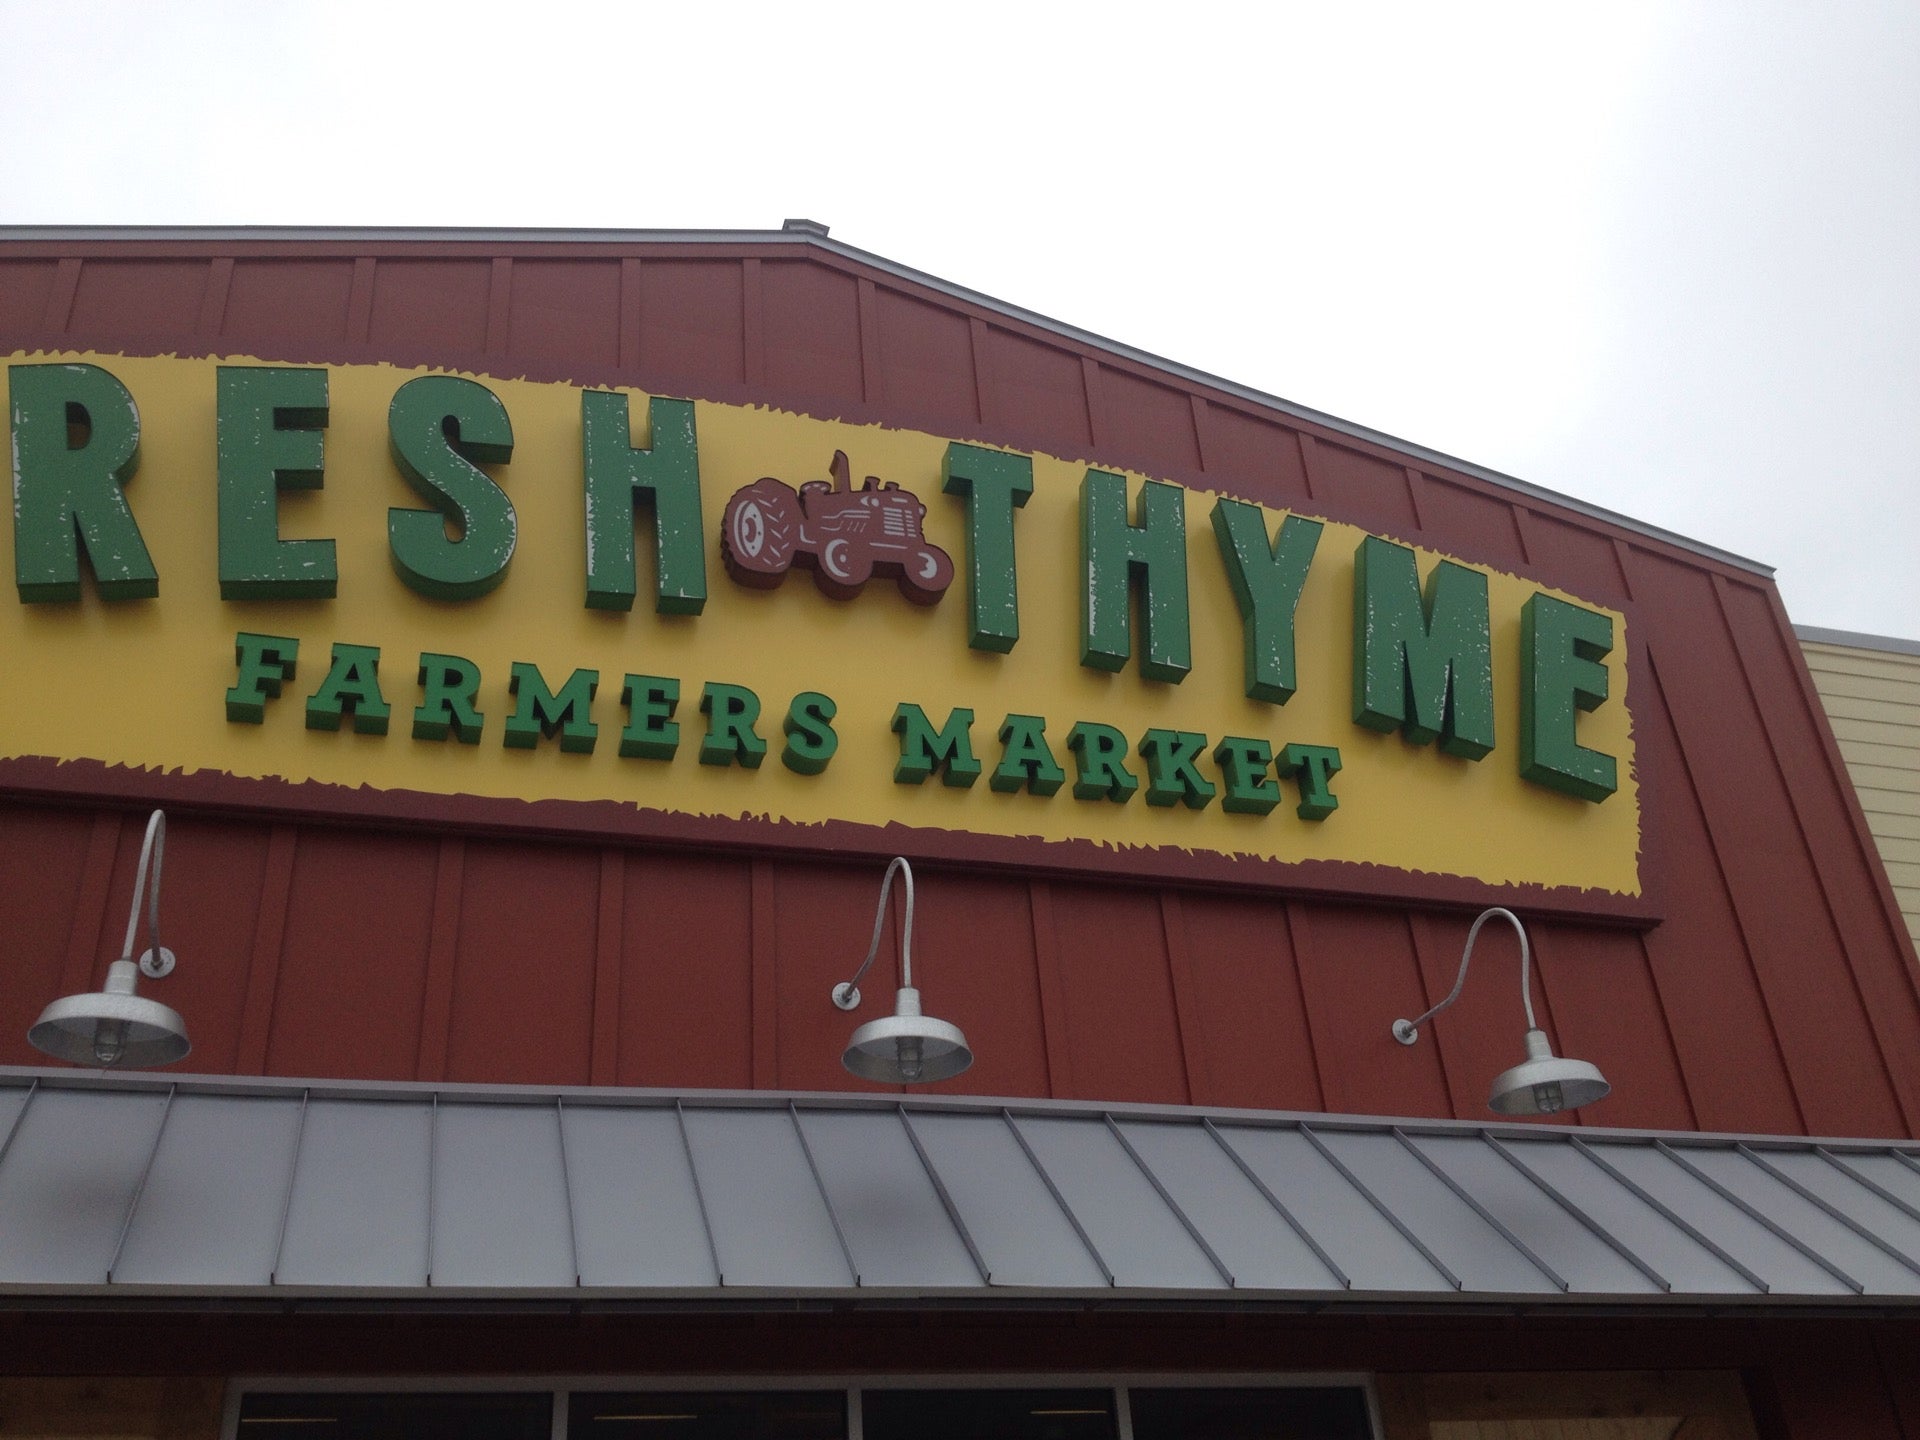 Fresh Thyme changes name and logo